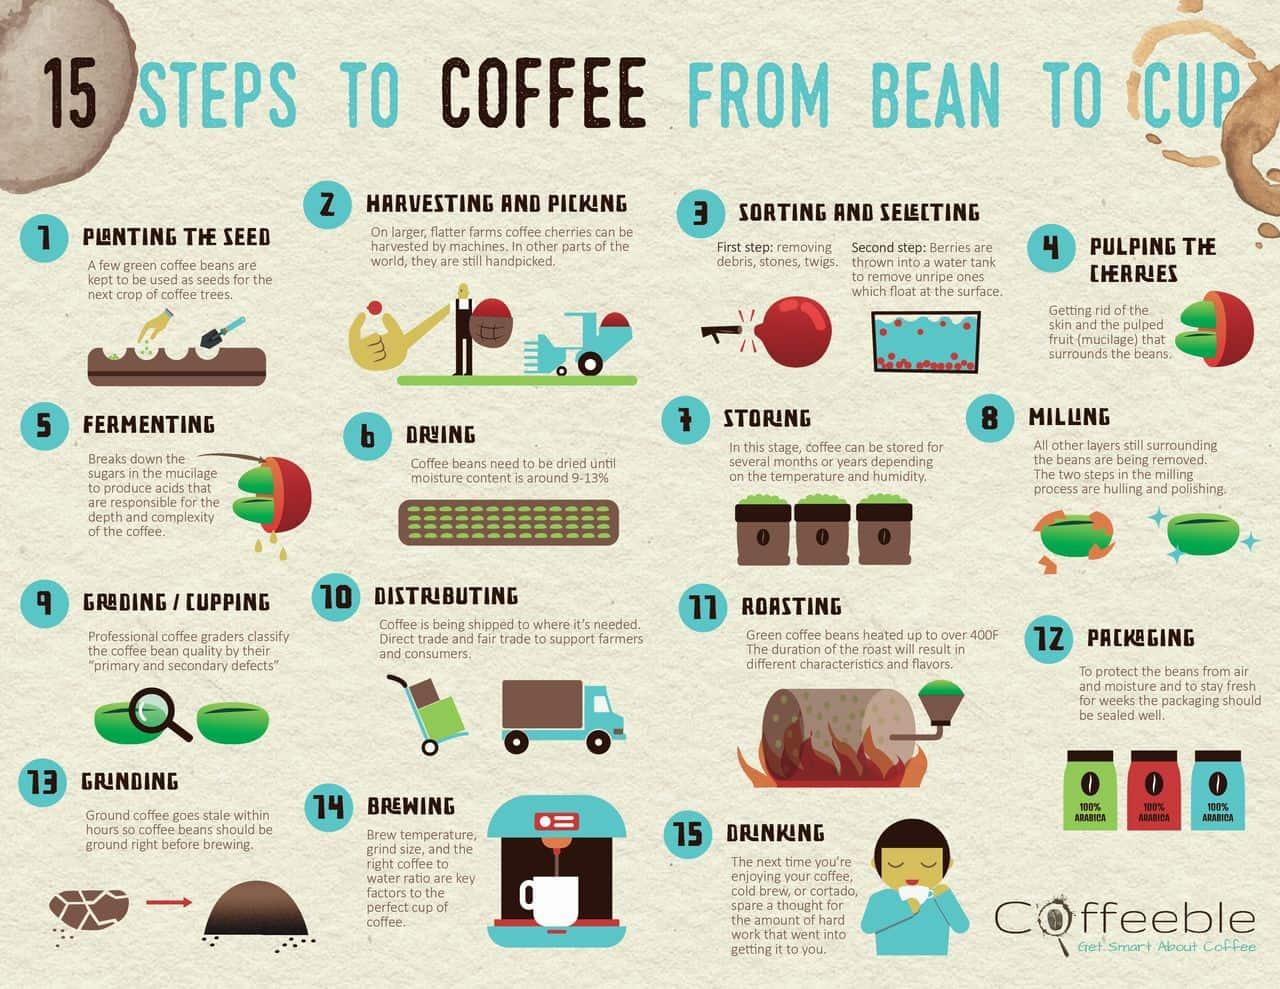 15-steps-to-coffee-from-seed-to-cup-infographic-large-1-514d38.jpg